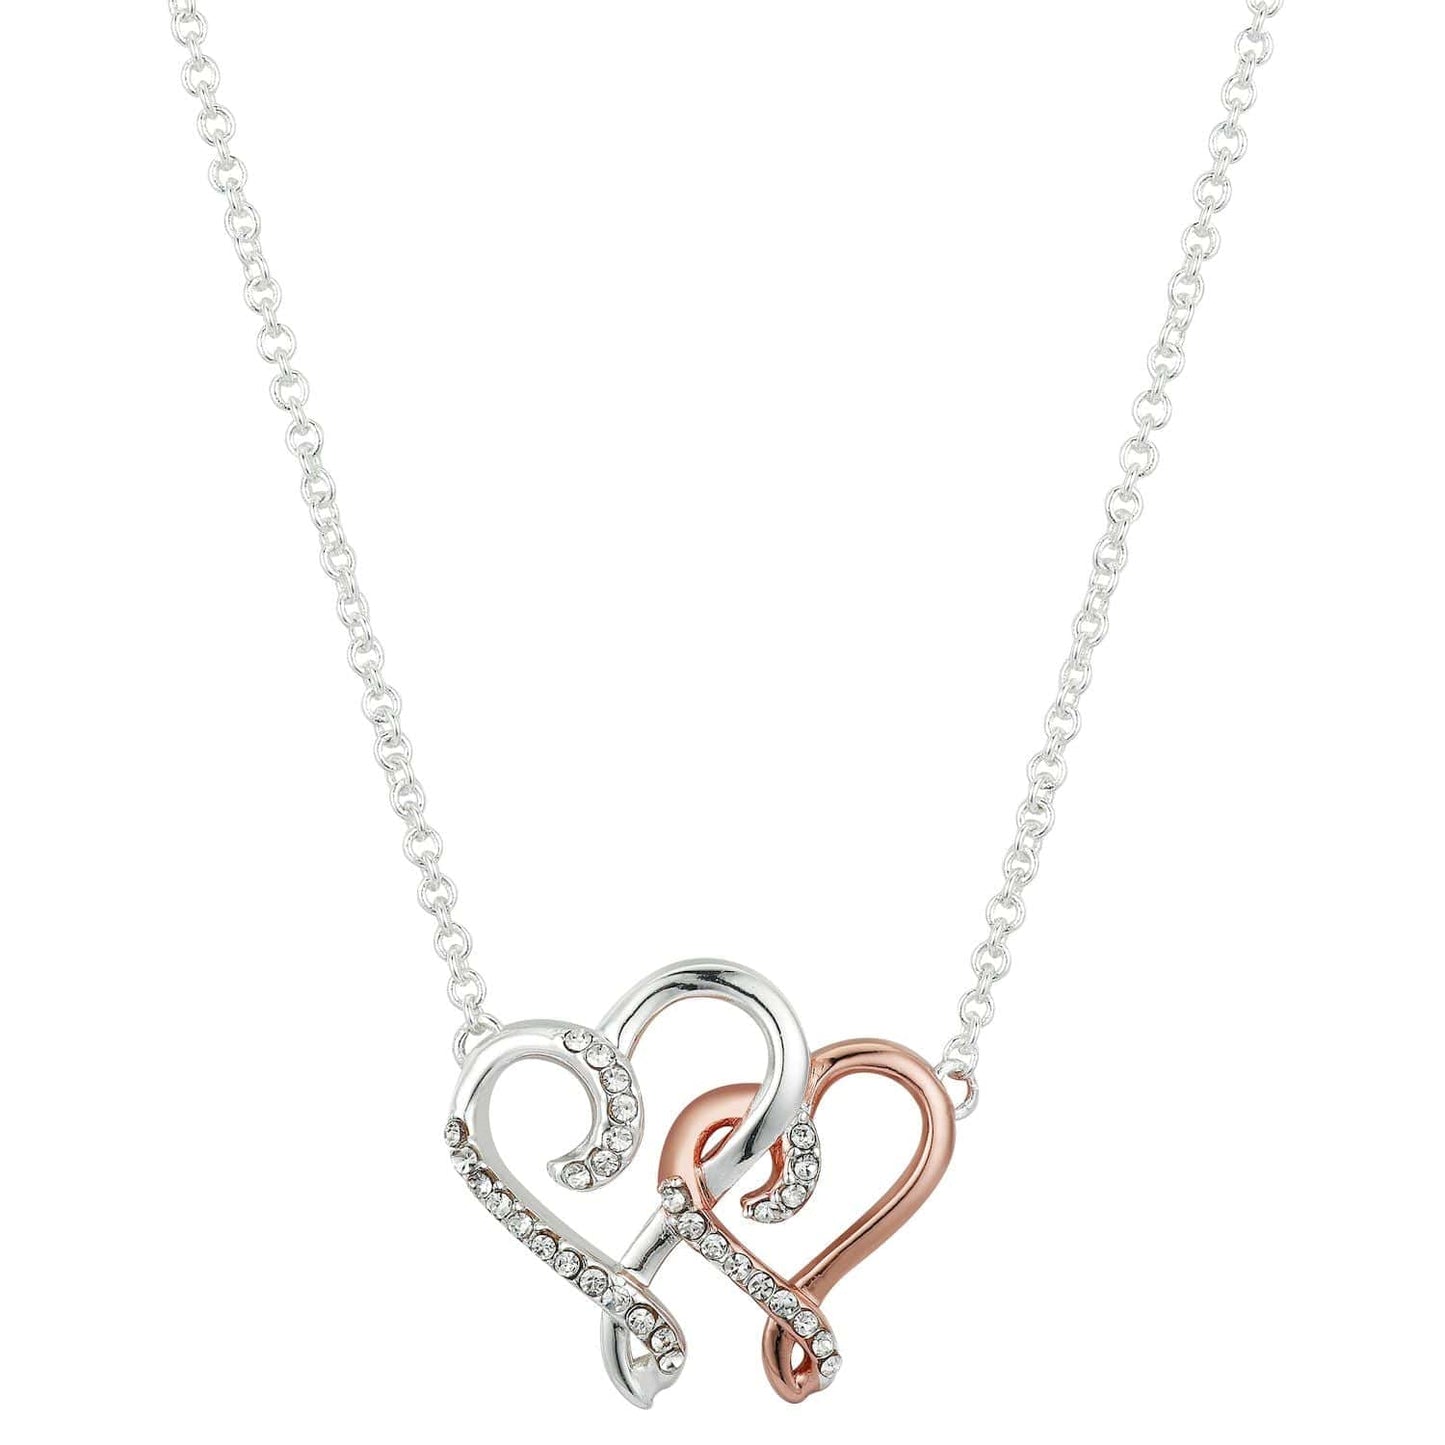 Brilliance Two-Tone Double Heart Necklace with Crystal Accents - CLASSY CLOSET BOUTIQUEBrilliance Two-Tone Double Heart Necklace with Crystal Accentsjewelry4146983Two Tone